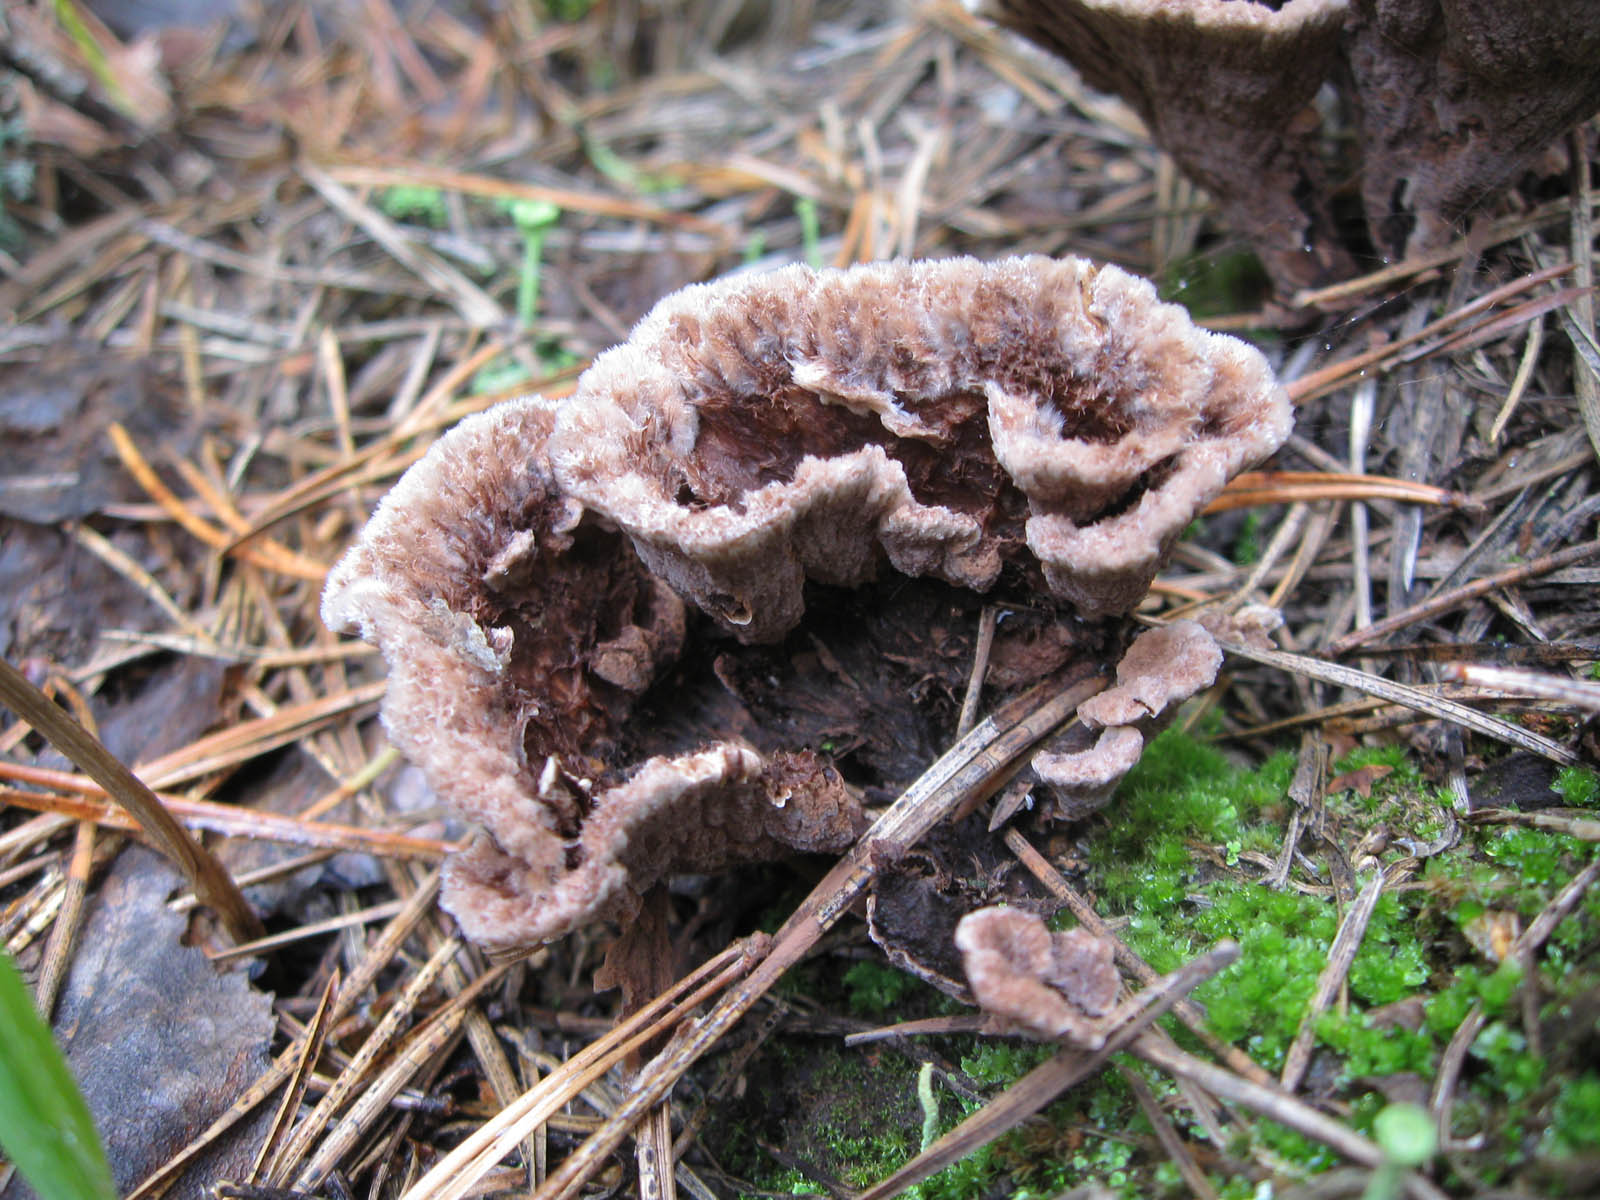 Terrestrial telephony (thelephora terrestris): what mushrooms look like, where and how they grow, are they edible or not